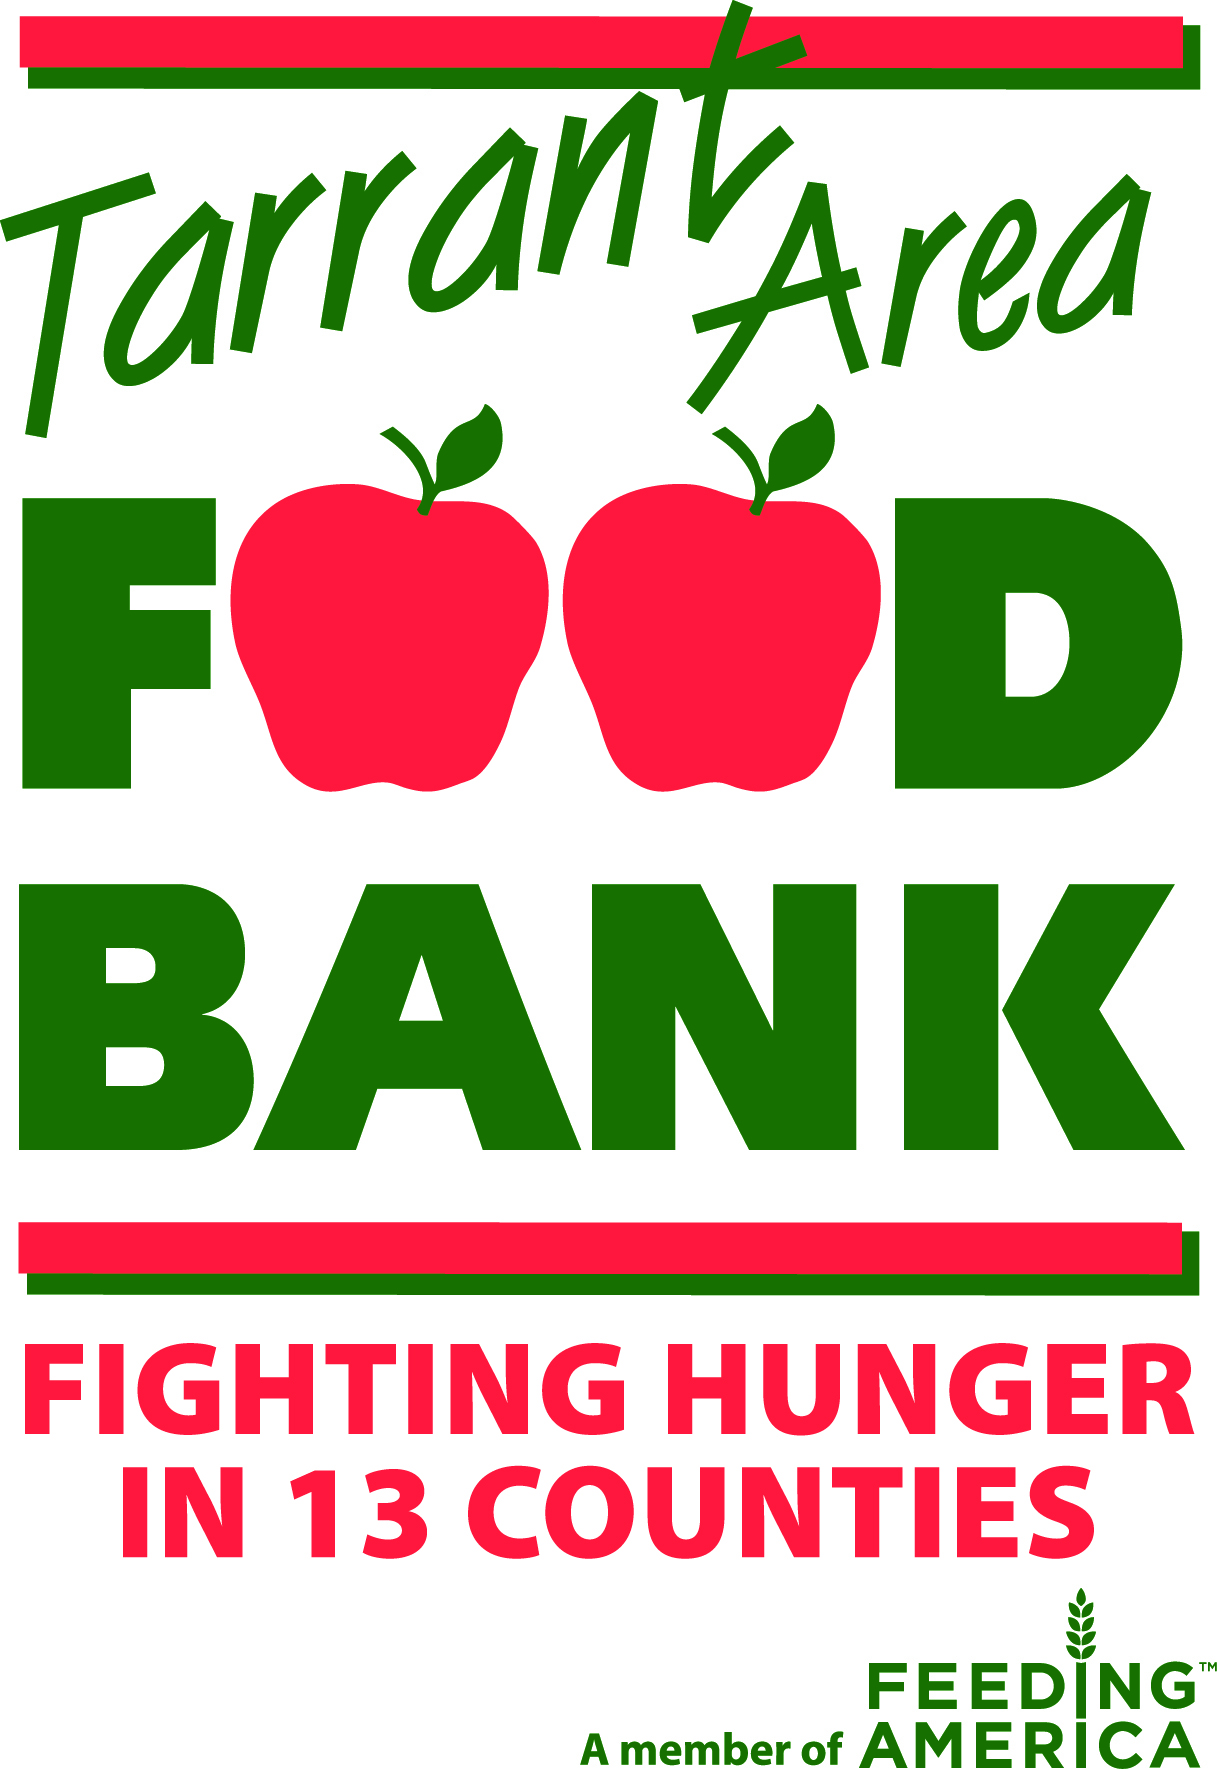 TAFB(1) “Thankful Thursdays” & “Doing All We Can”: November Food Drive Benefits Our Local Area Food Bank